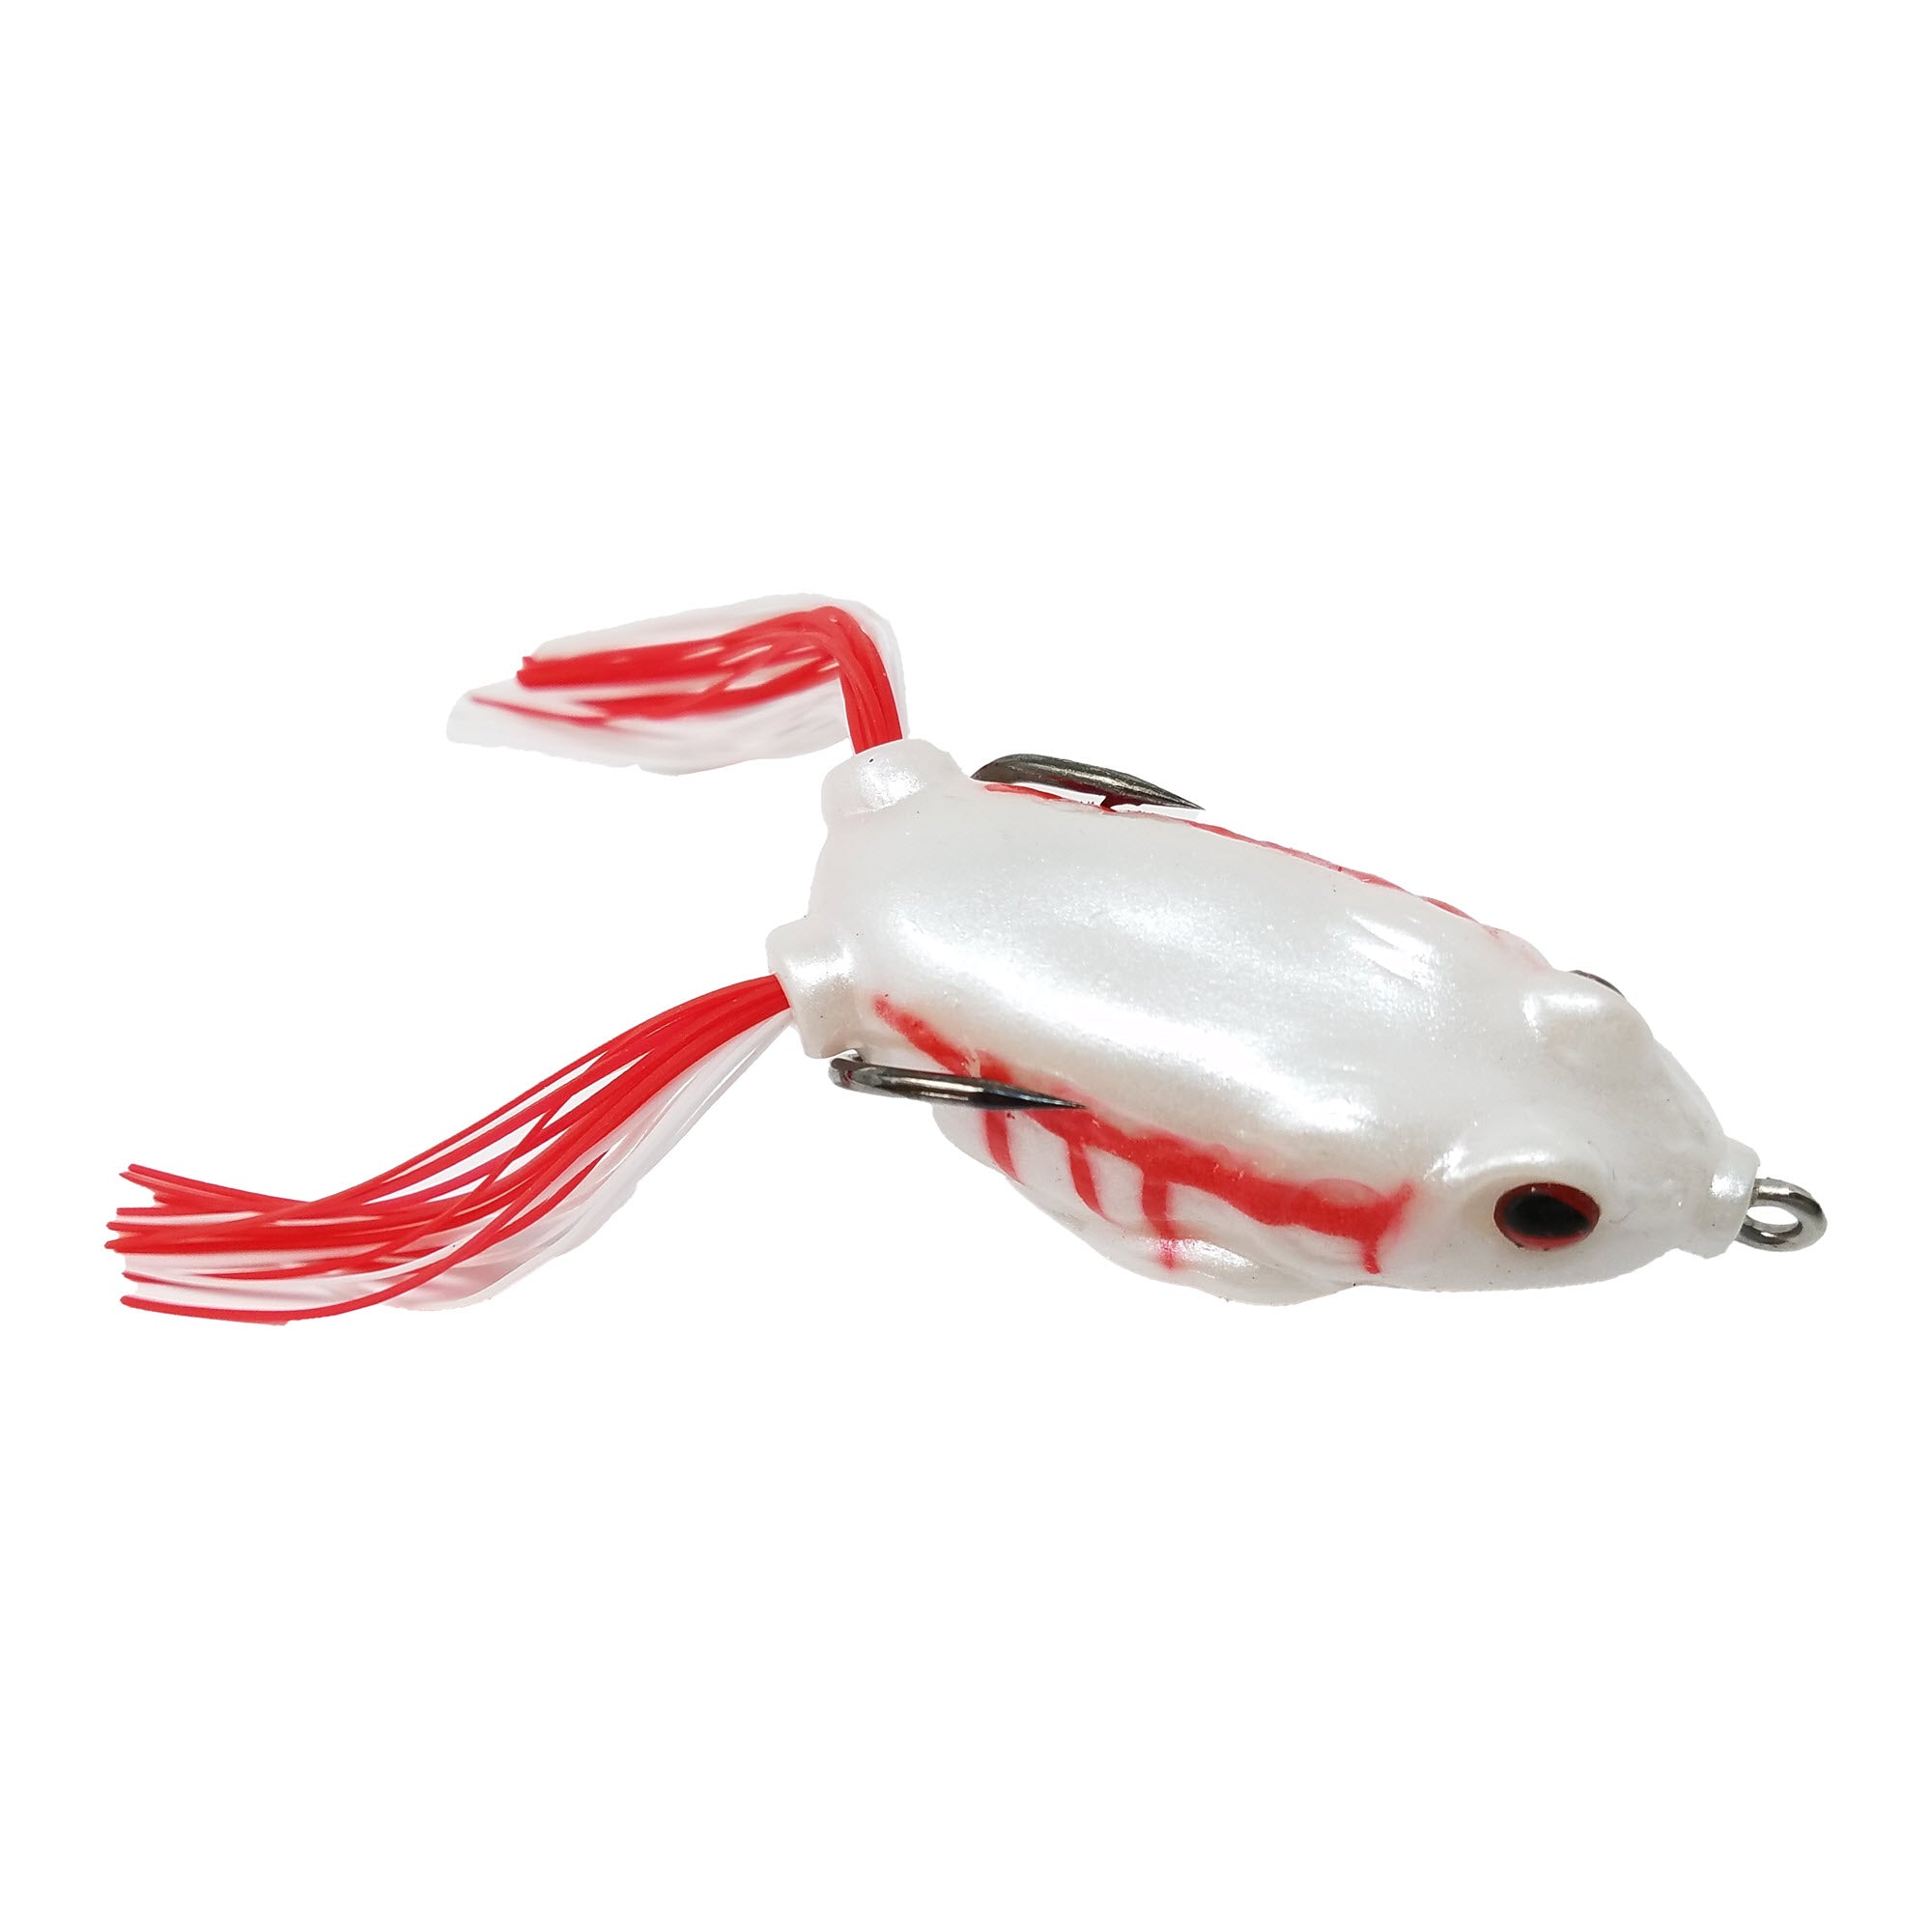 Frog Fishing Baits & Lures for sale, Shop with Afterpay